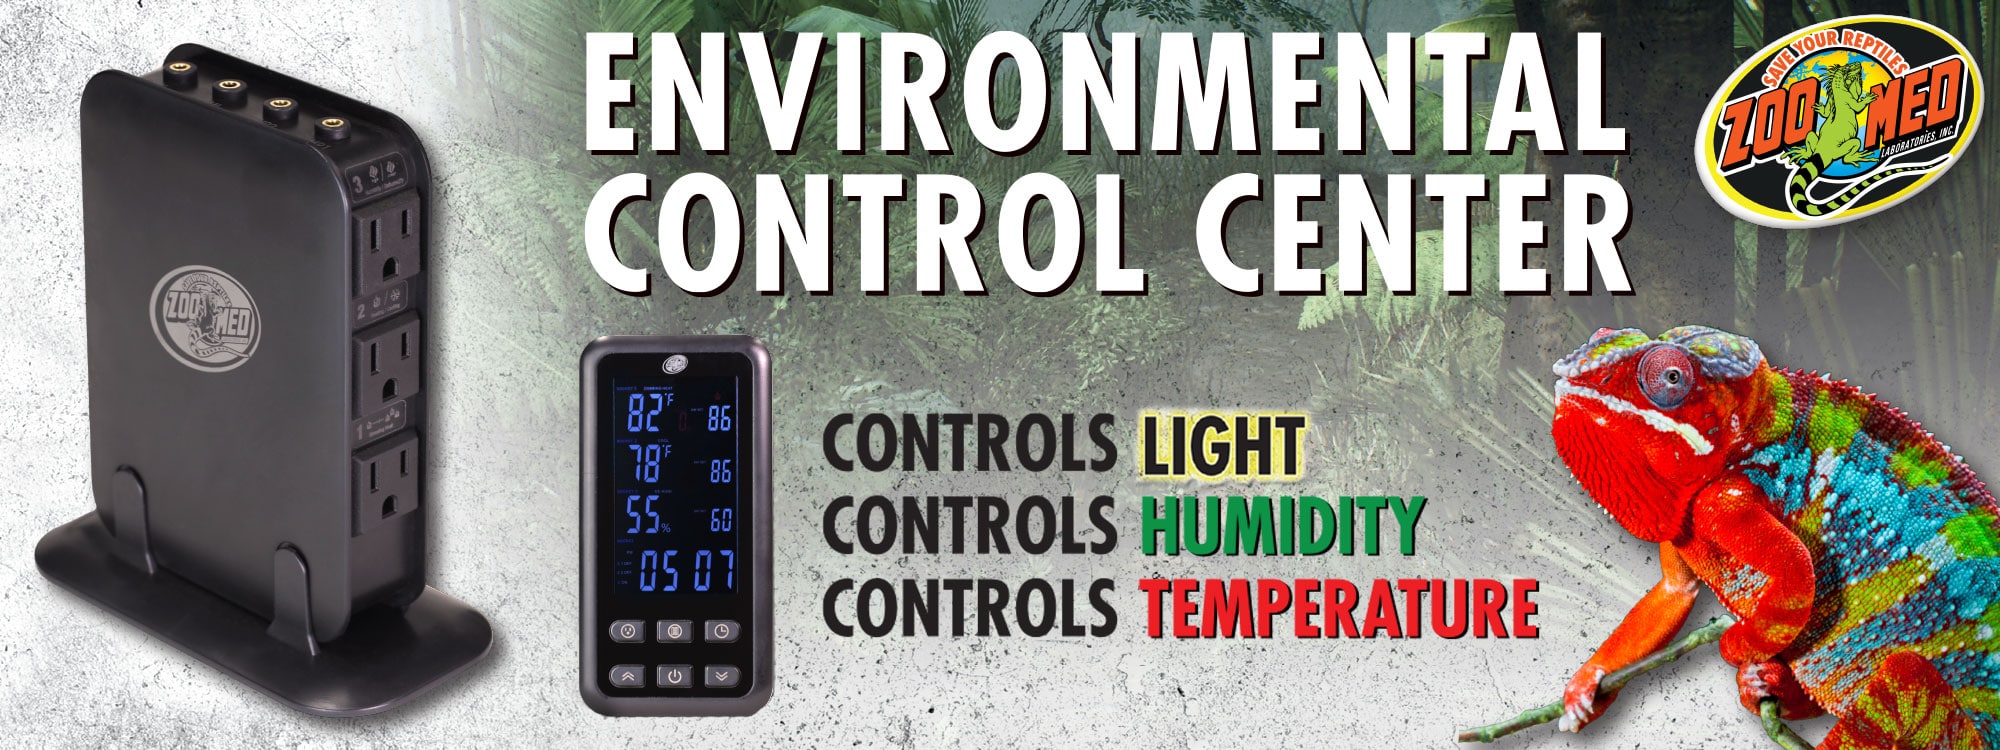 Environmental Control Center. Compatible with: Incandescent Lamps, Mercury Vapor Lamps, Compact Fluorescent Lamps, T8, T5, Halogen Lamps, LED, Ceramic Heat Emitters, Under Tank Heaters, Misters, Fogger, and More